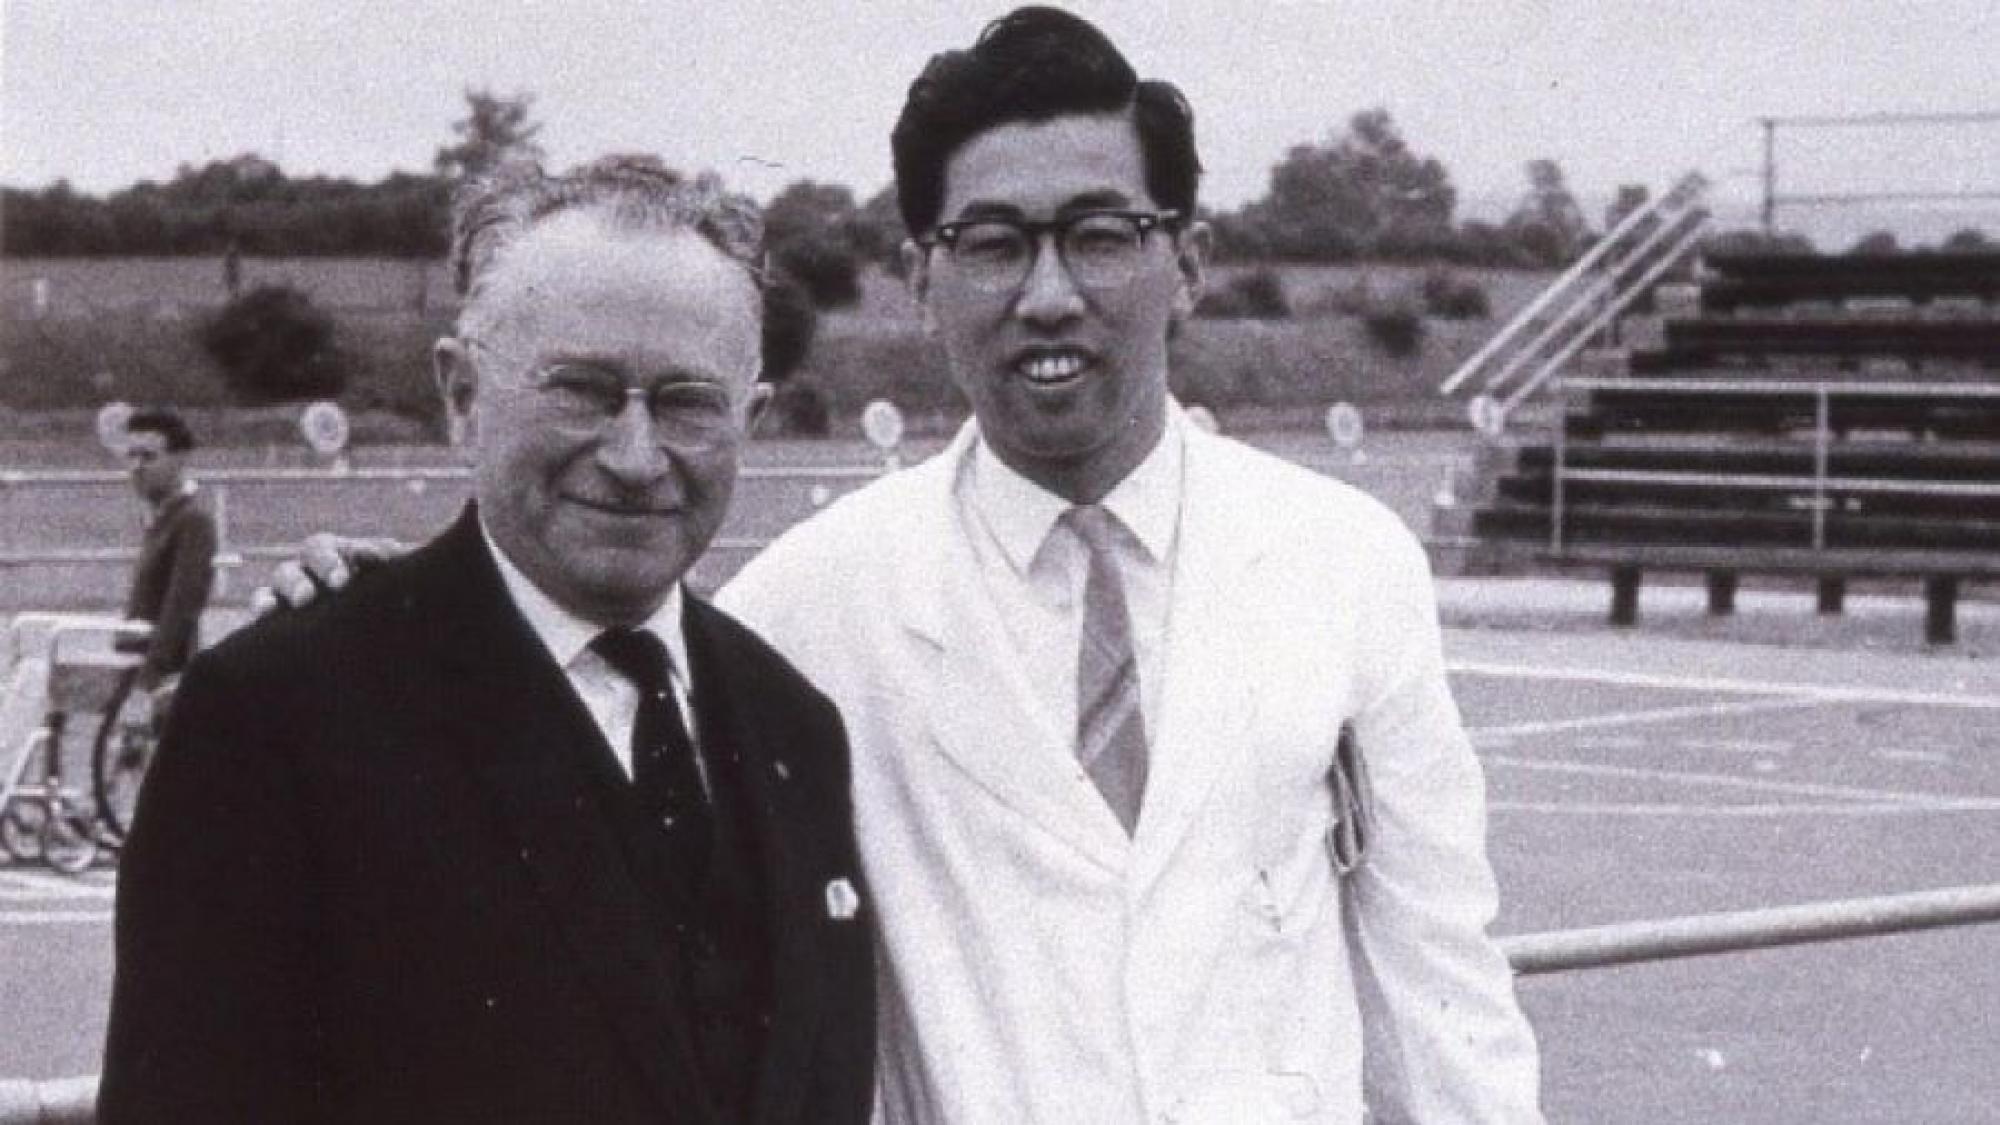 Black and white photo of Japanese man posing with Sir Ludwig Guttman 